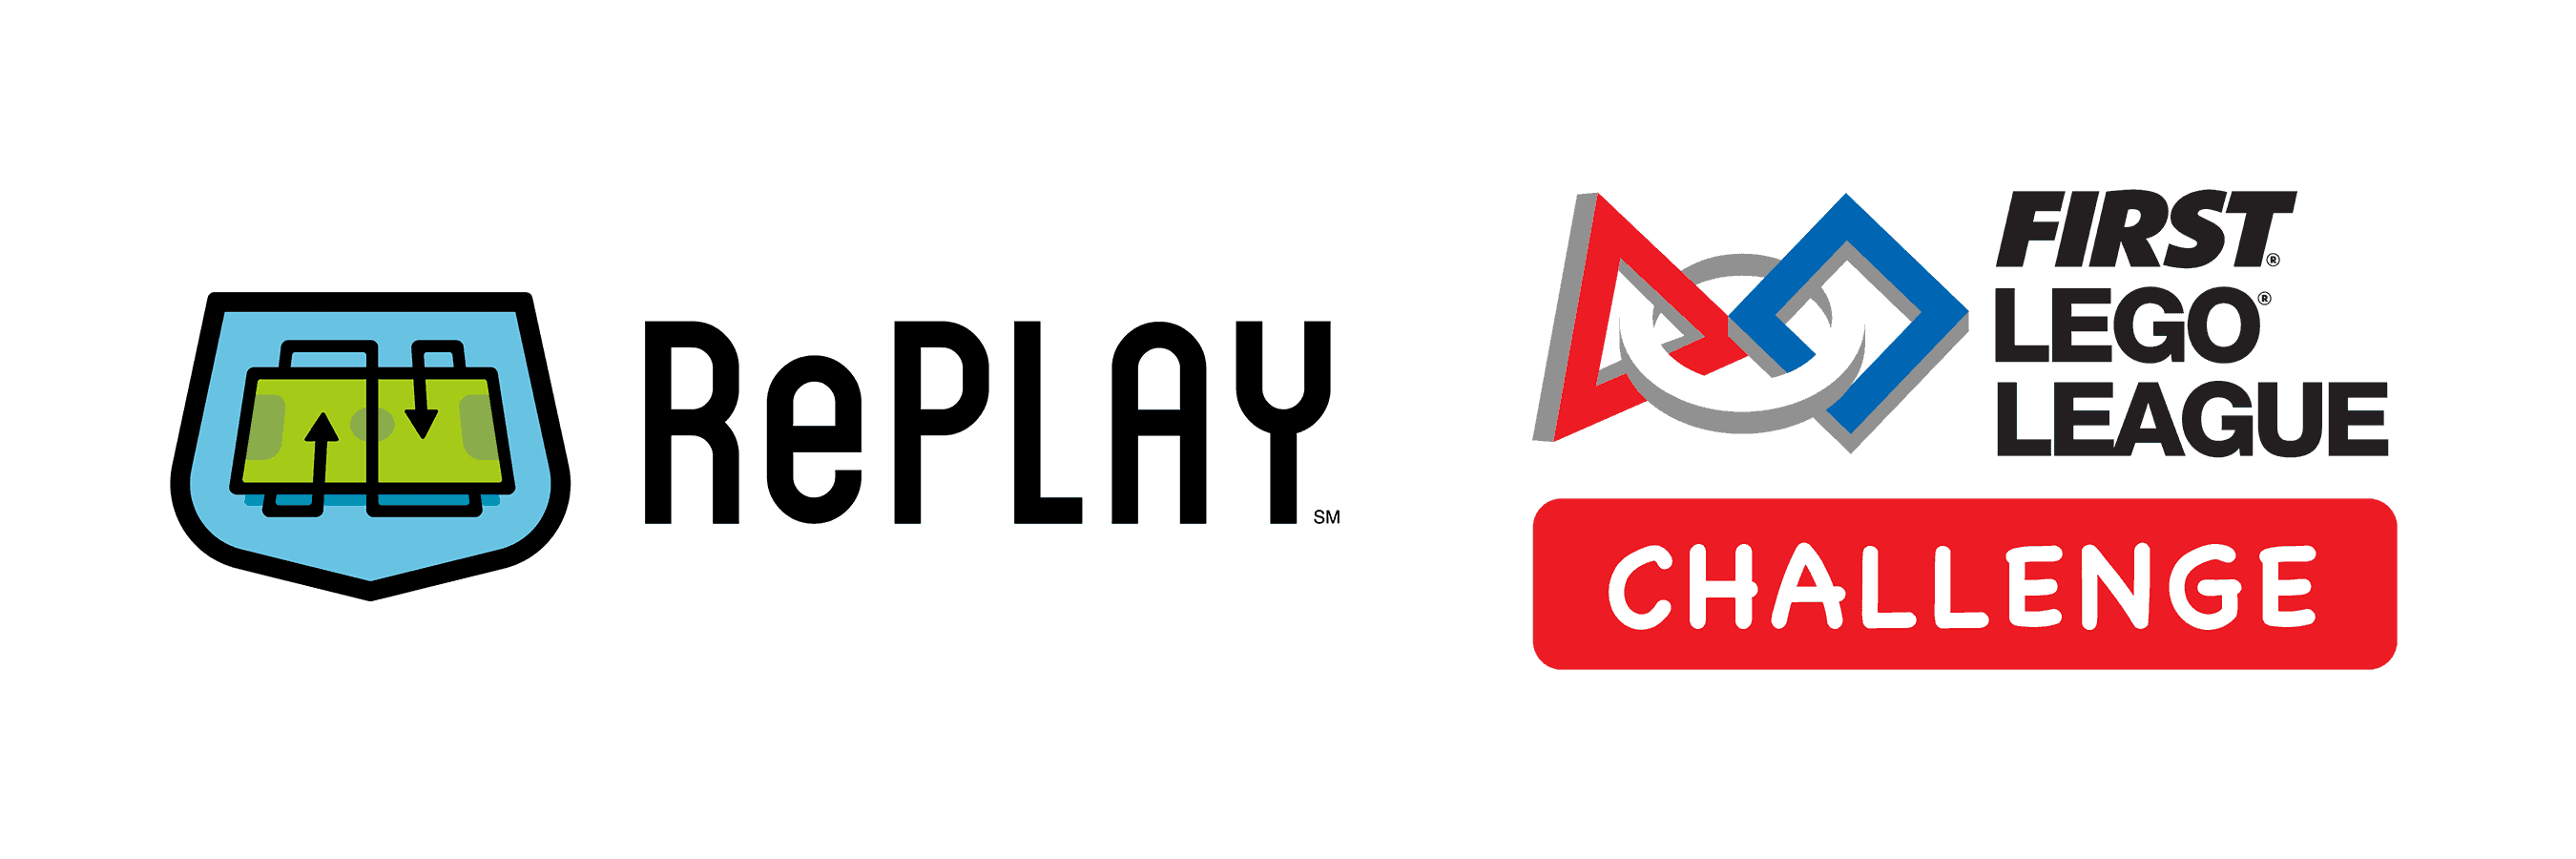 2020-2021 RePLAY Game Challenge logo + FIRST LEGO League Challenge logo side by side